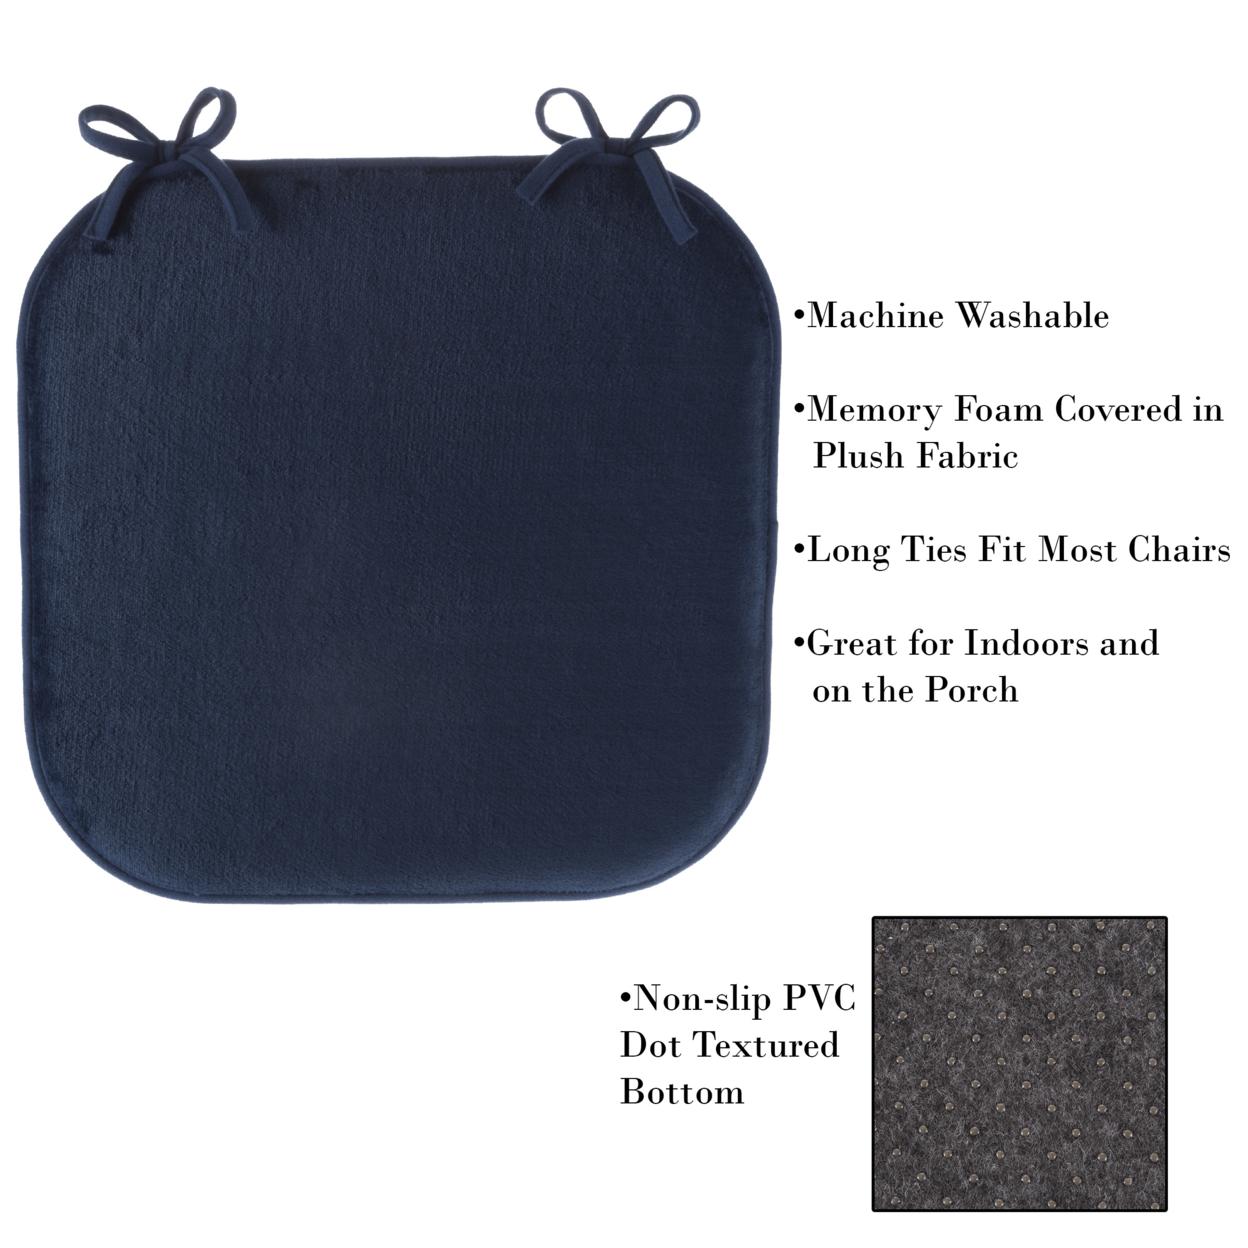 Memory Foam 16 X 16 Plush Chair Cover Cushion With Ties 1 Inch Thick Comfy Non Slip Navy